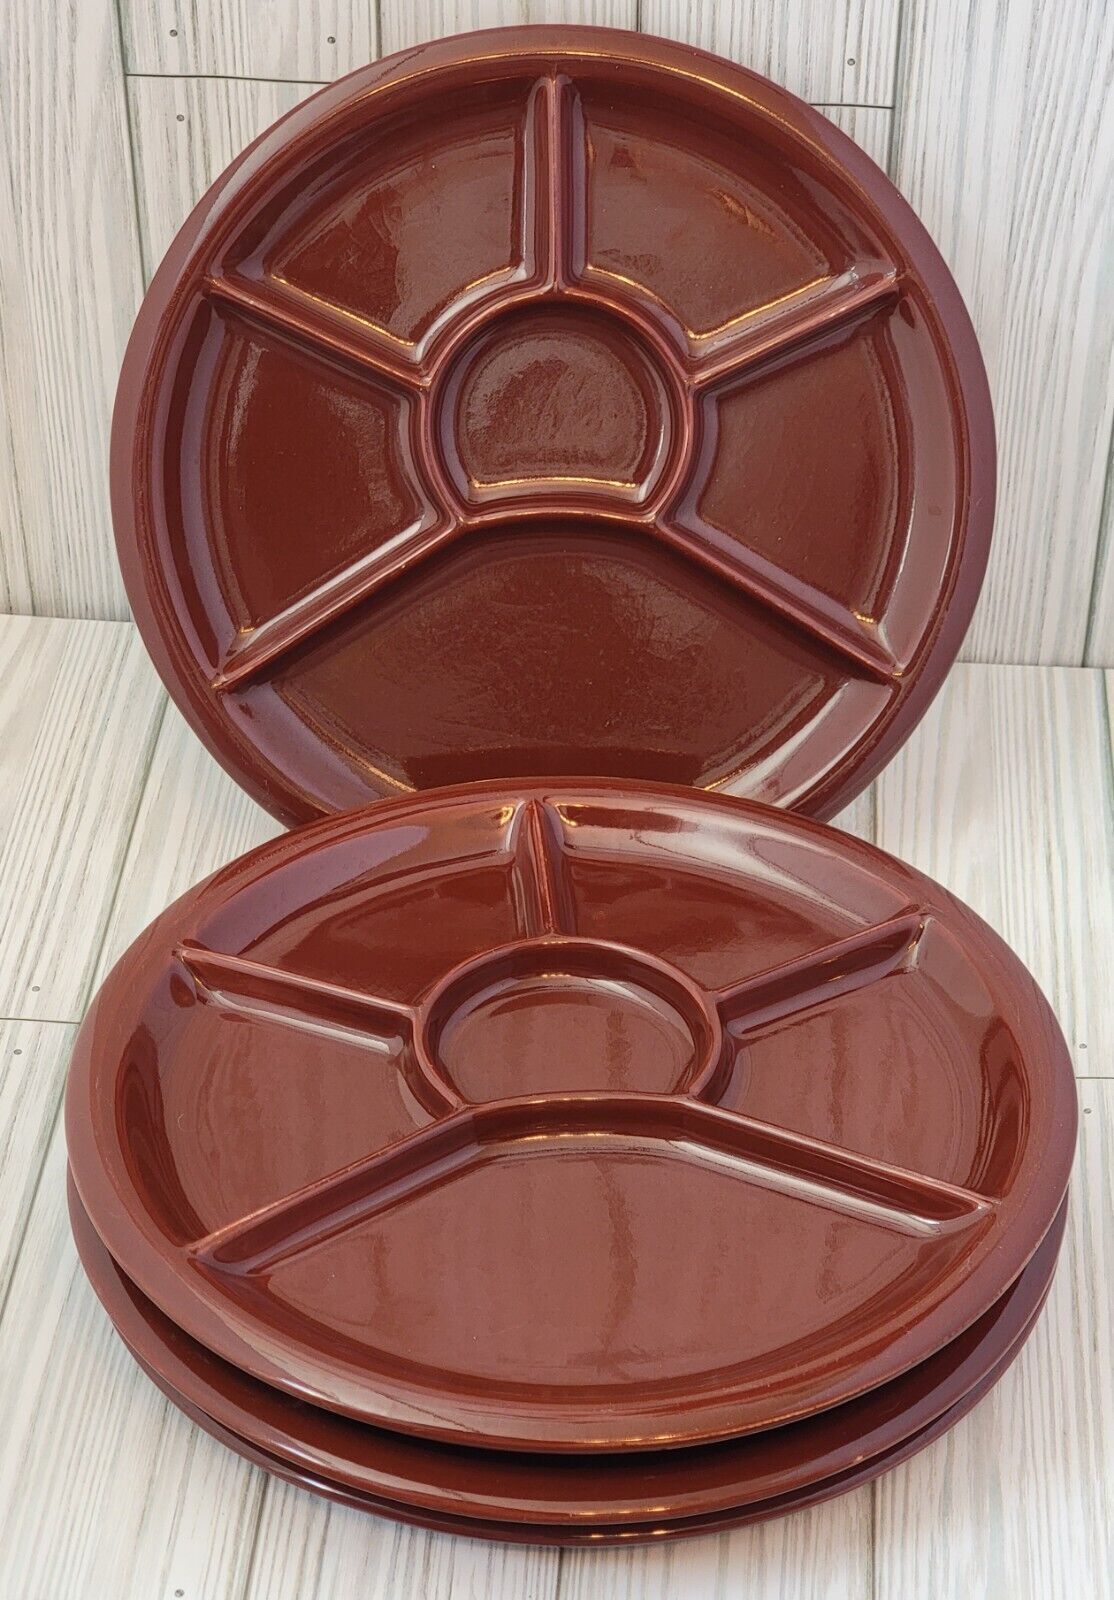 Set Of 4 Vintage Fondue Plates Chocolate Brown Divided Plates Charcuterie Plate